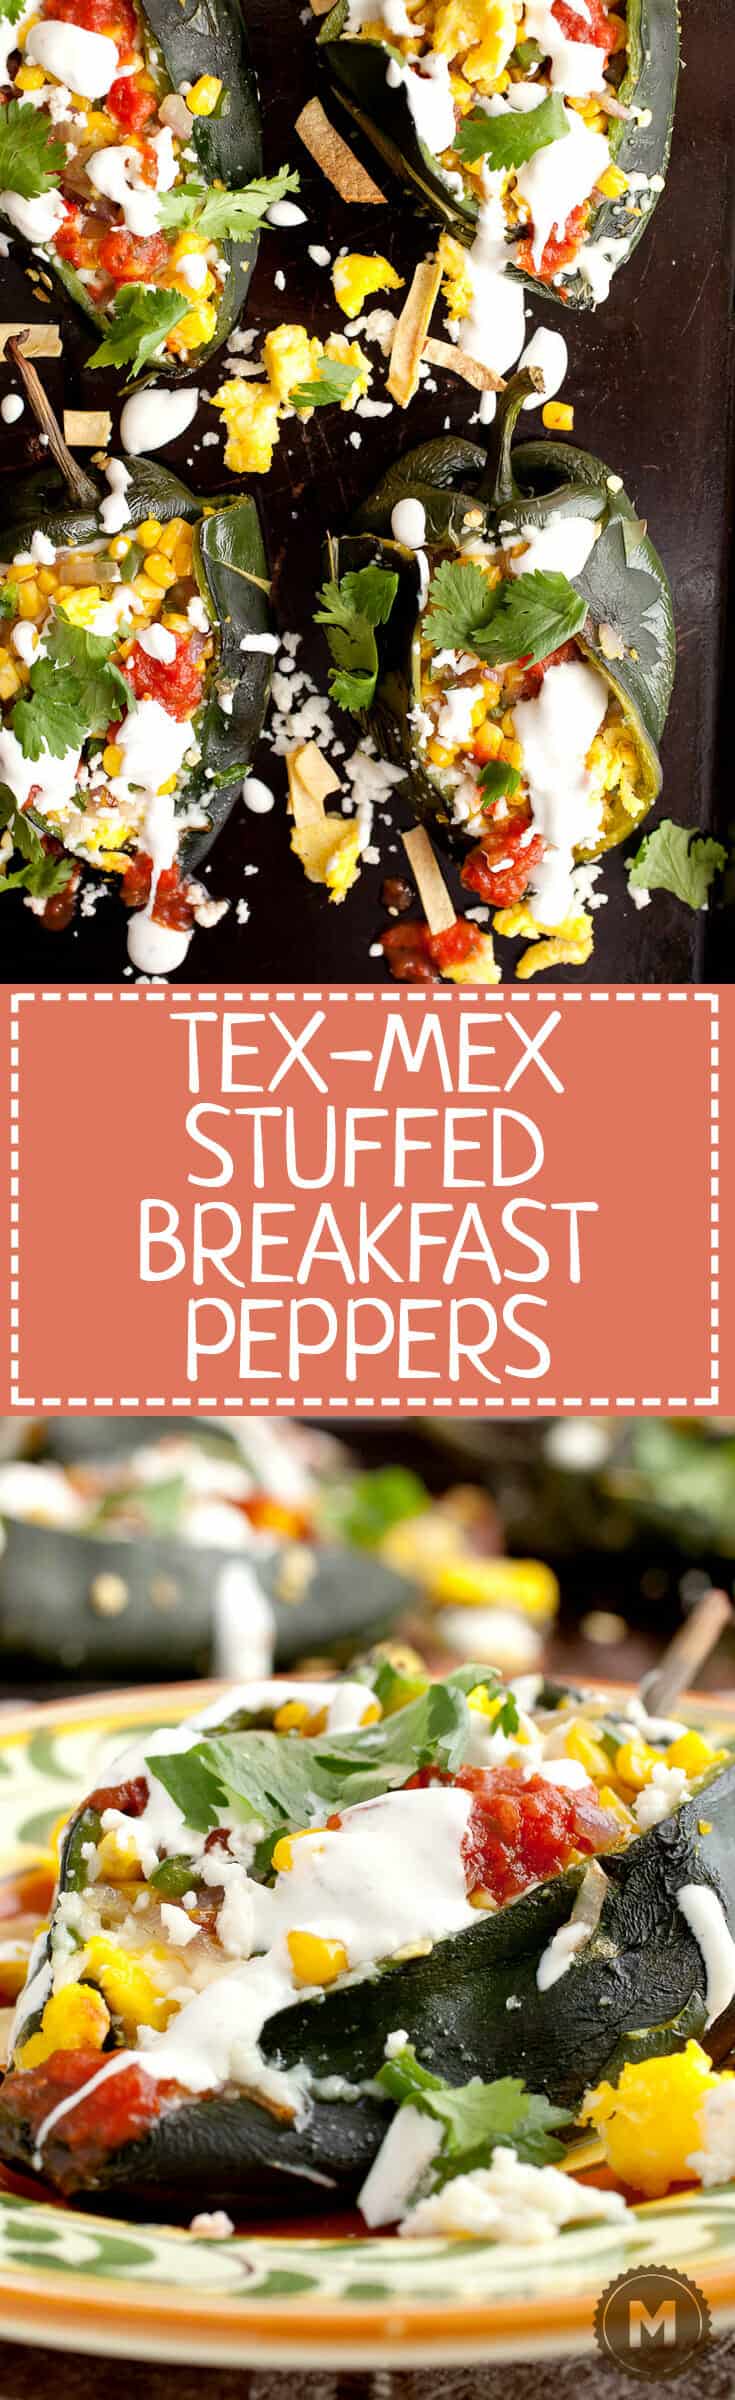 Tex-Mex Breakfast Stuffed Peppers: Roasted Poblano peppers stuffed with eggs, corn strips, corn, queso fresco, salsa, and a light sour cream sauce! This is one good breakfast pepper! | macheesmo.com